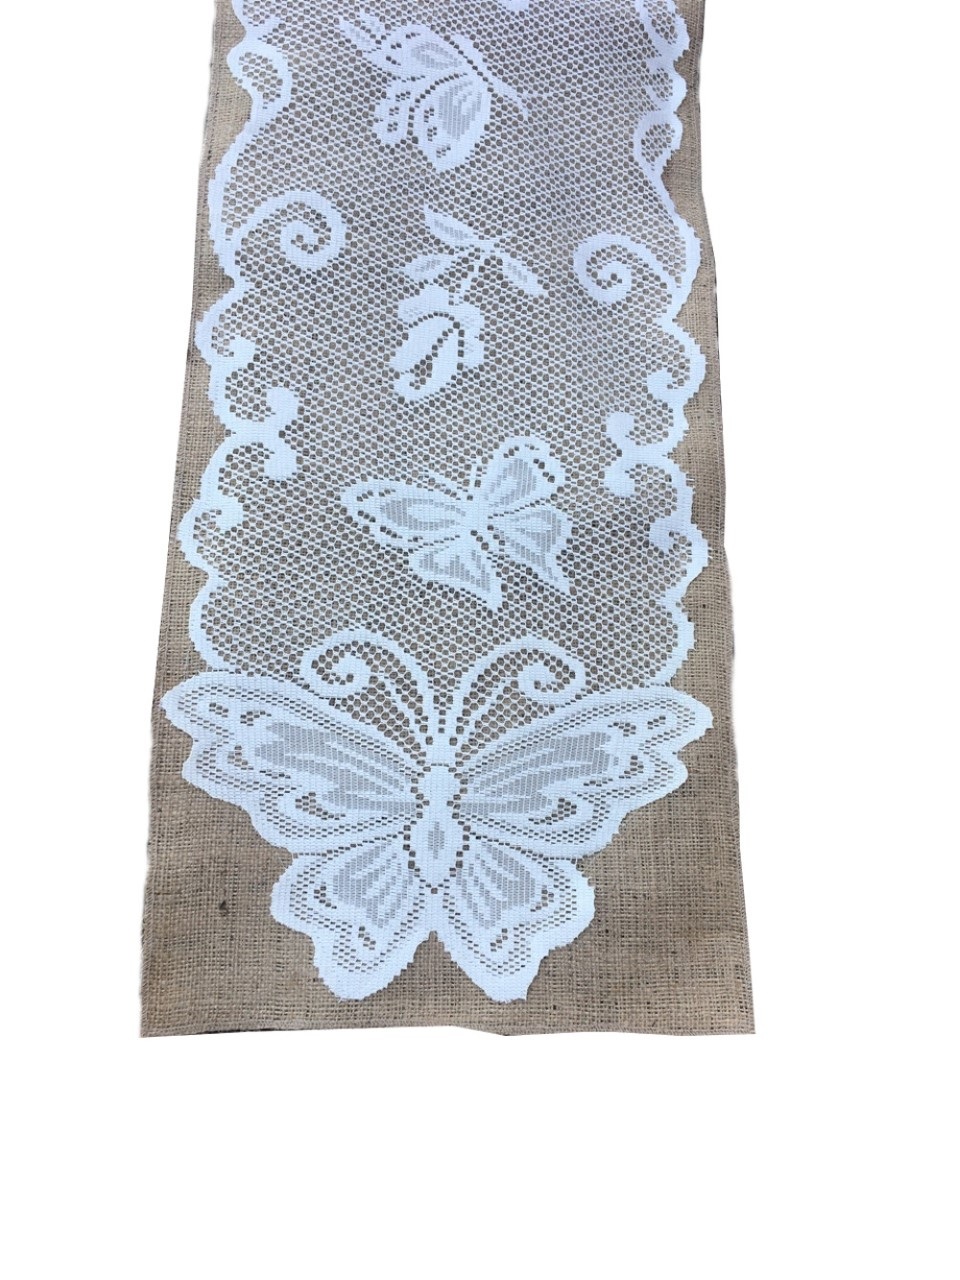 Burlap Table Runner With Lace - Butterfly Design 14" x 96" - Click Image to Close